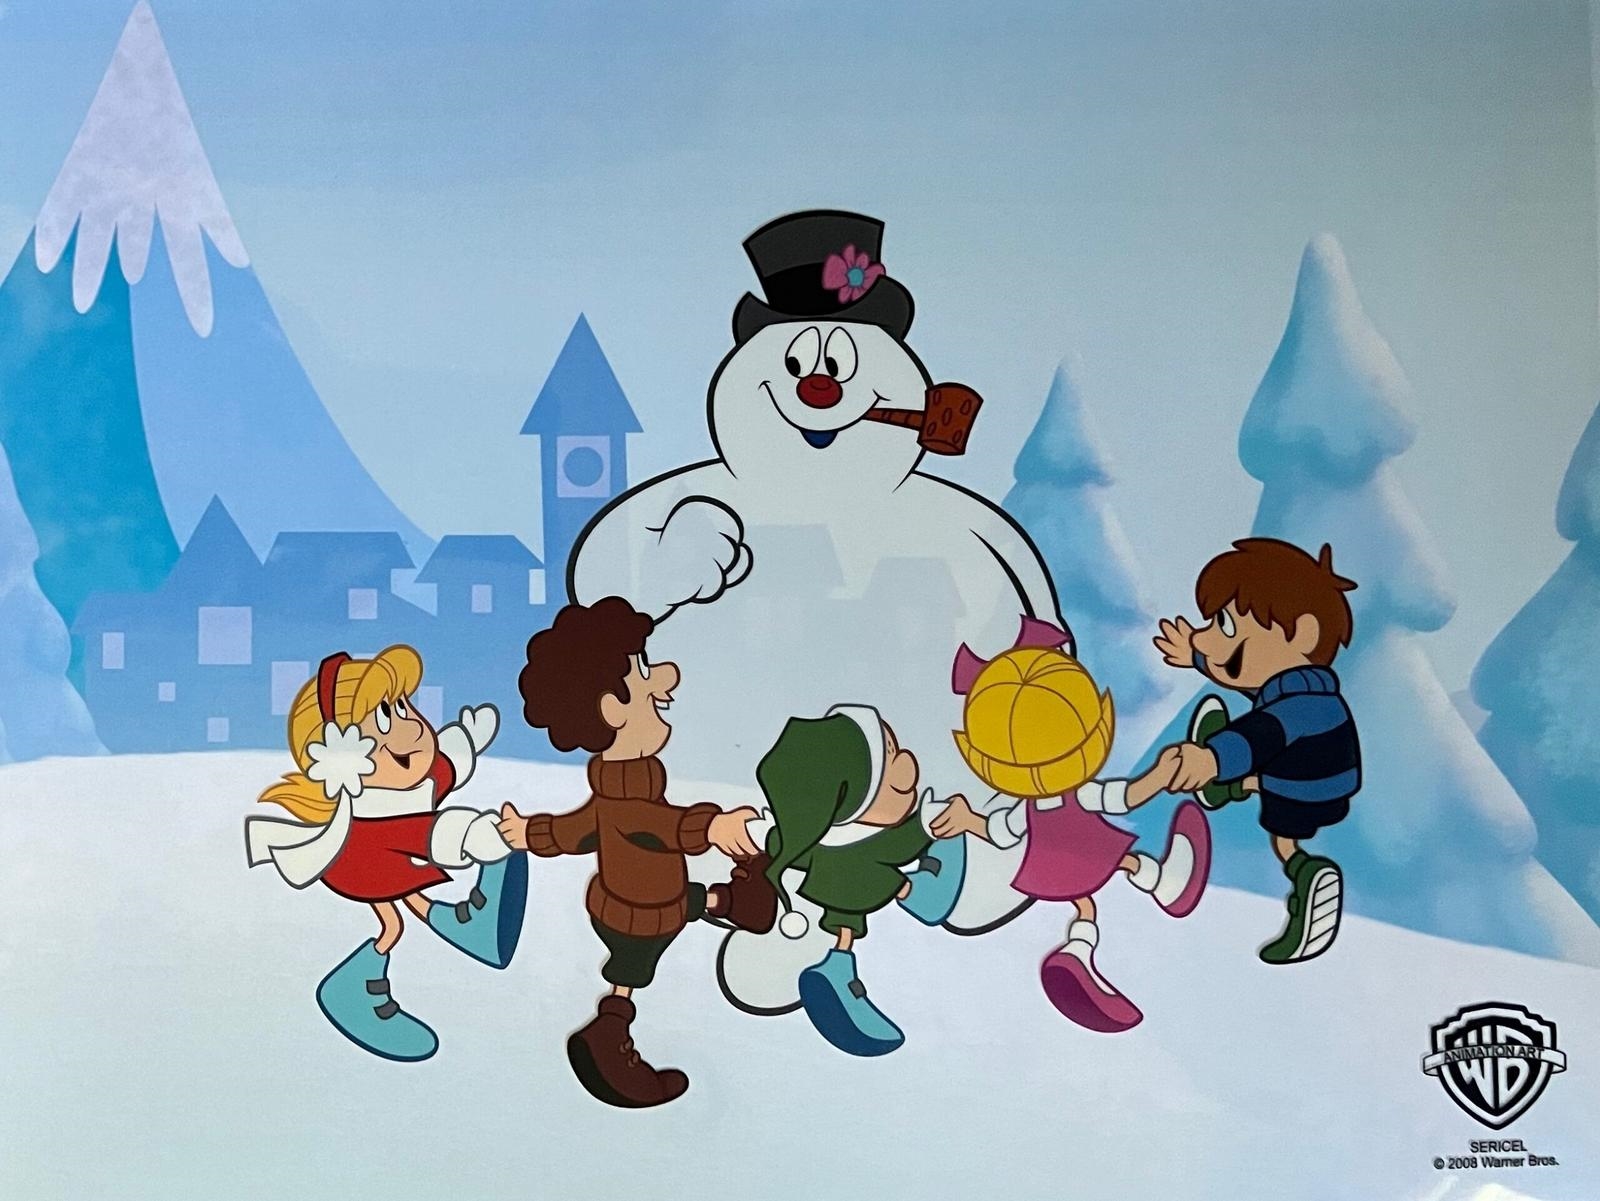 Frosty the Snowman - Warner Brothers